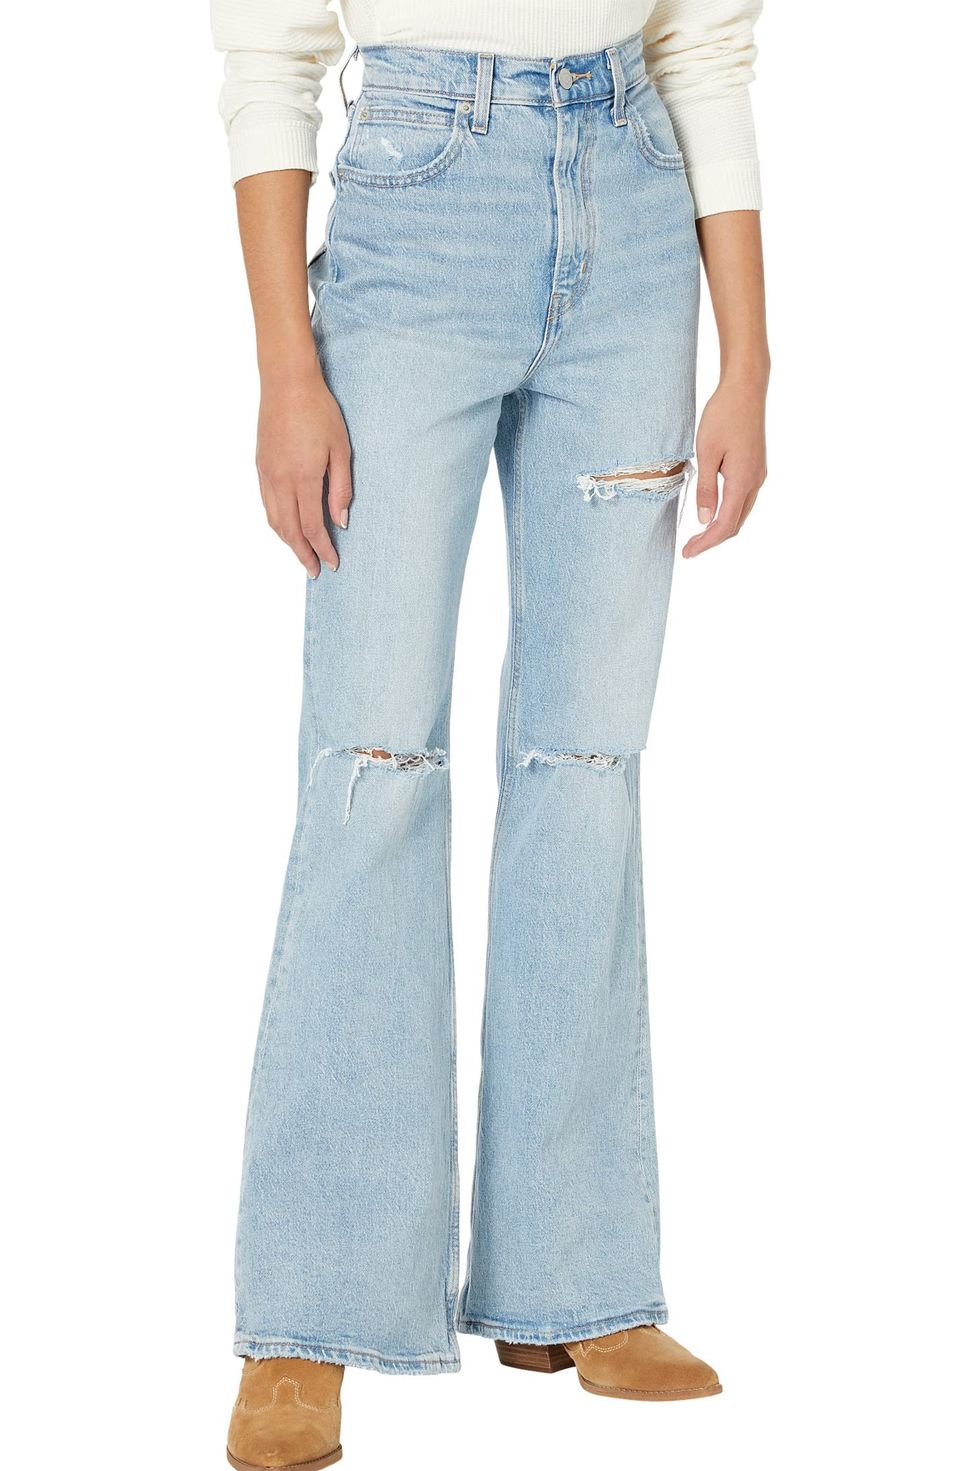 Trendy or Tacky: 70's Bell Bottom Jeans - Stylish Starlets